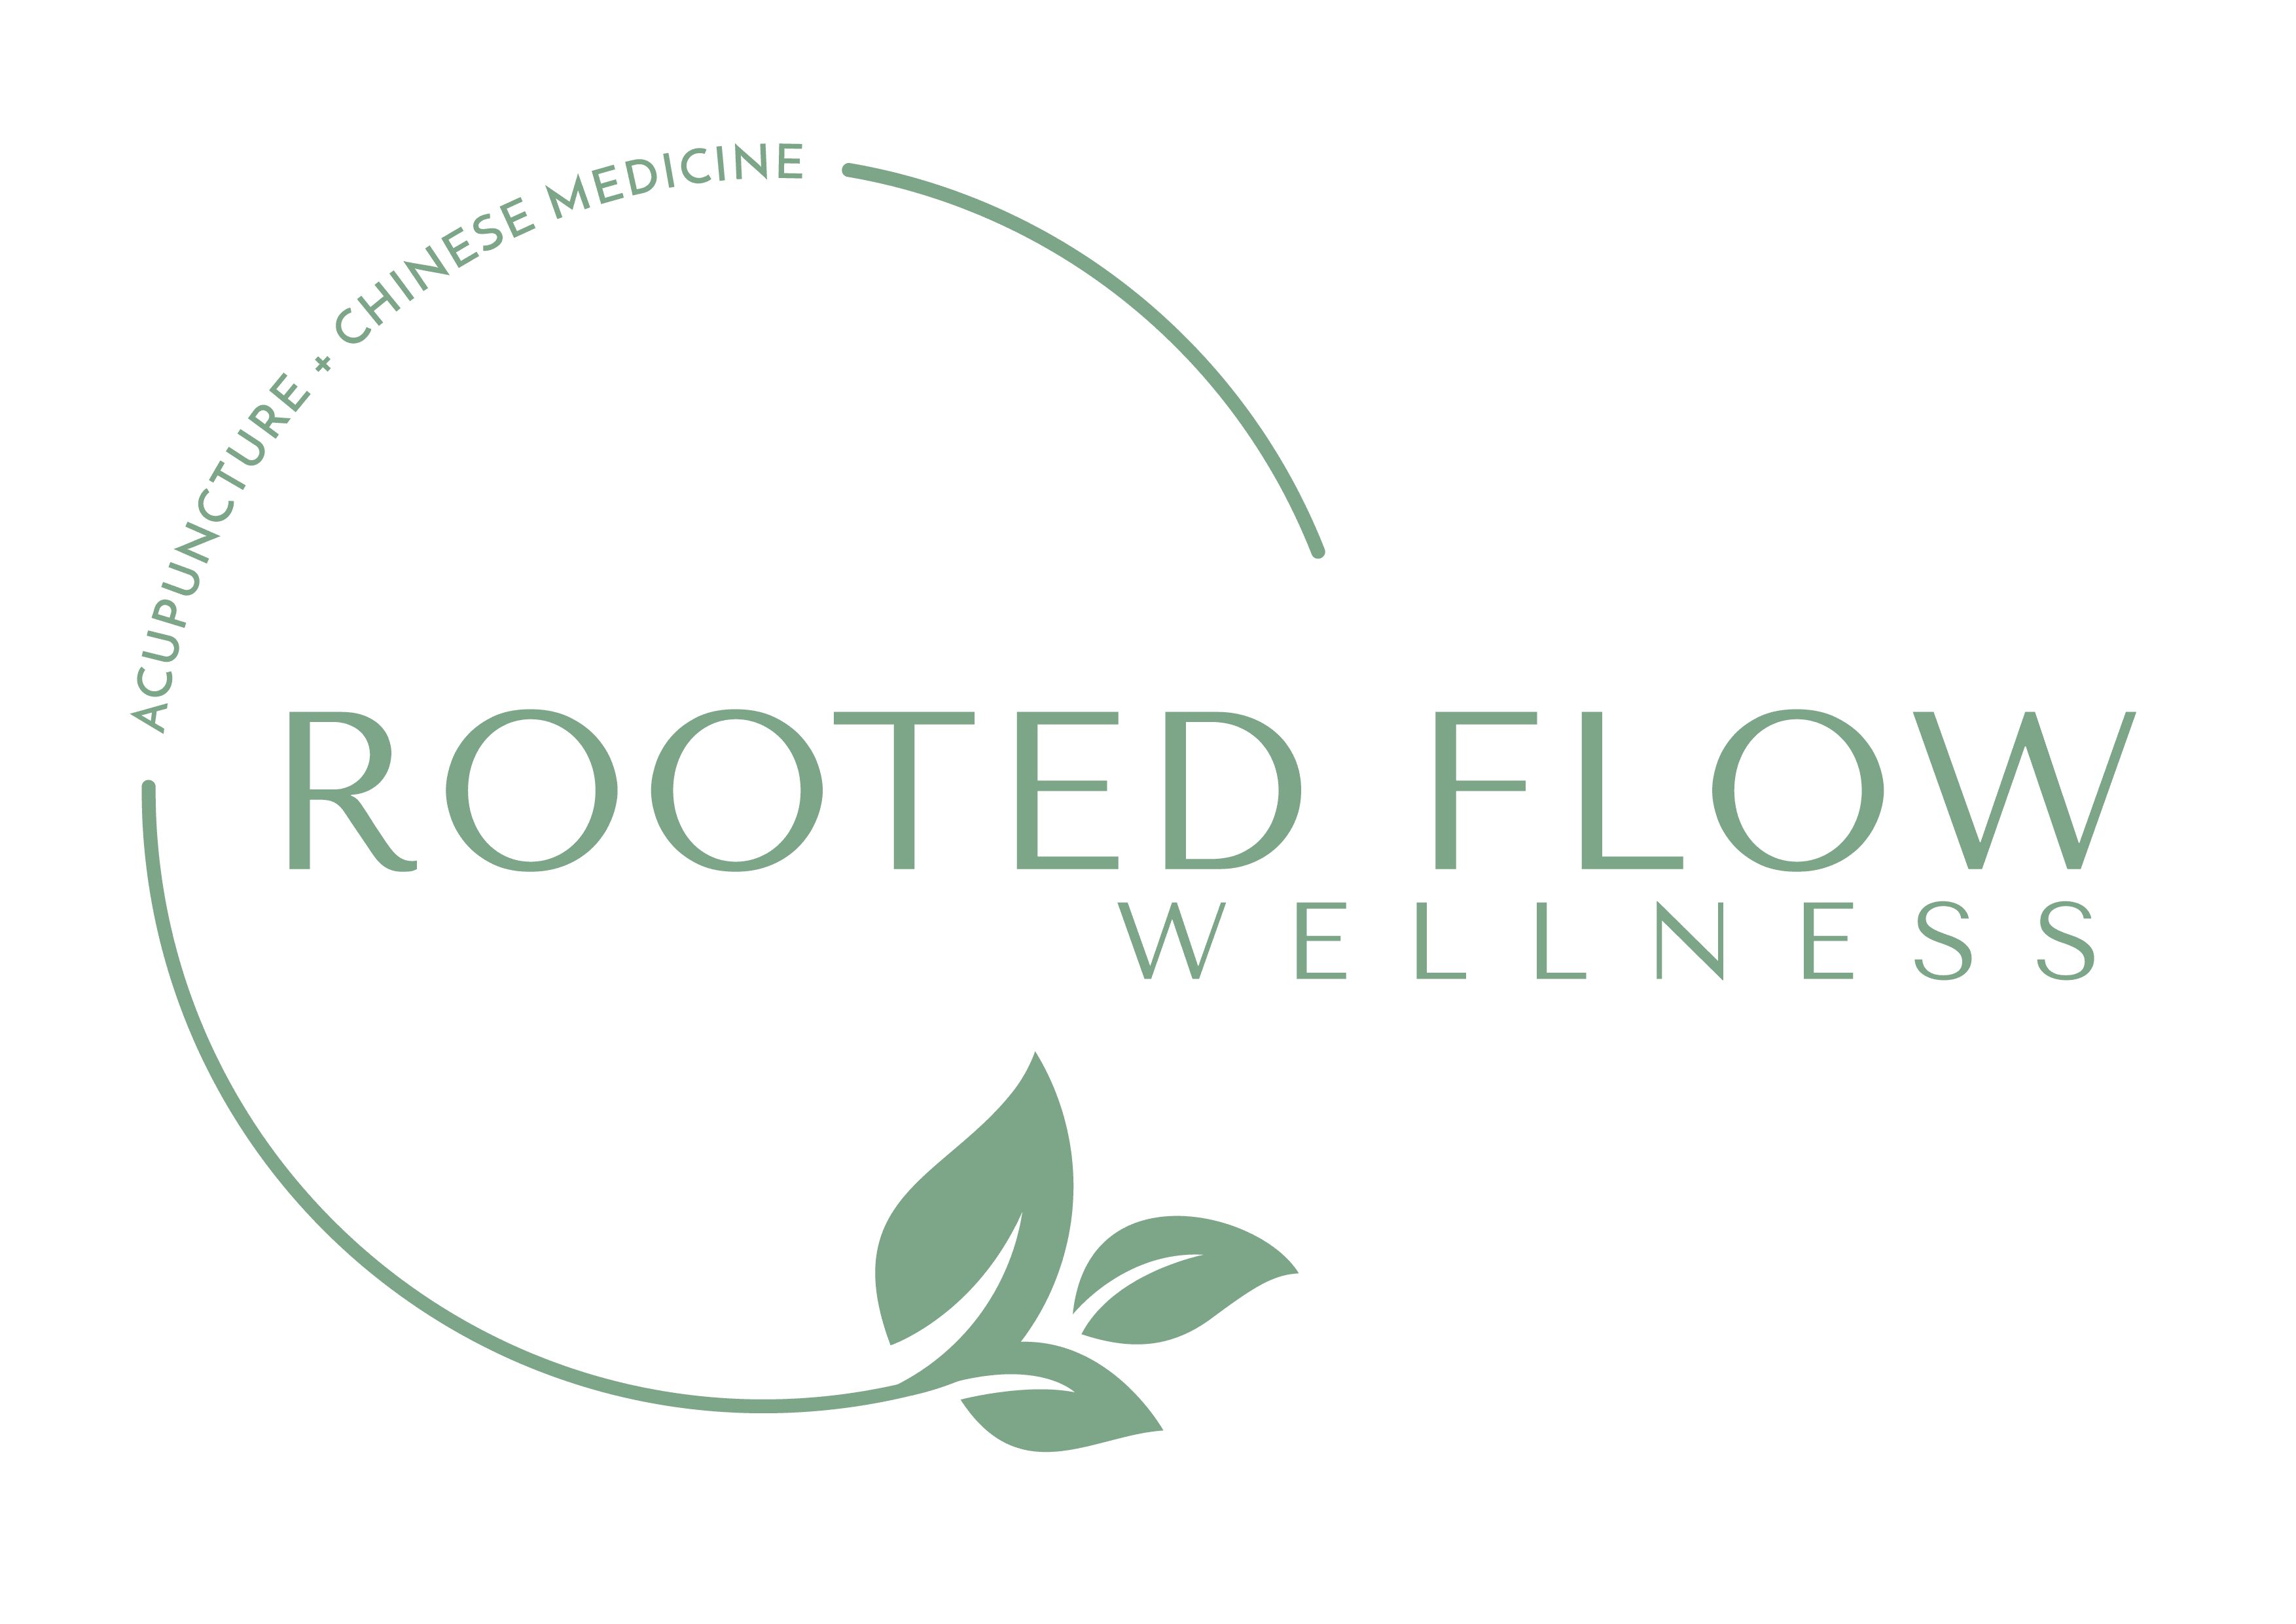 Rooted Flow Wellness